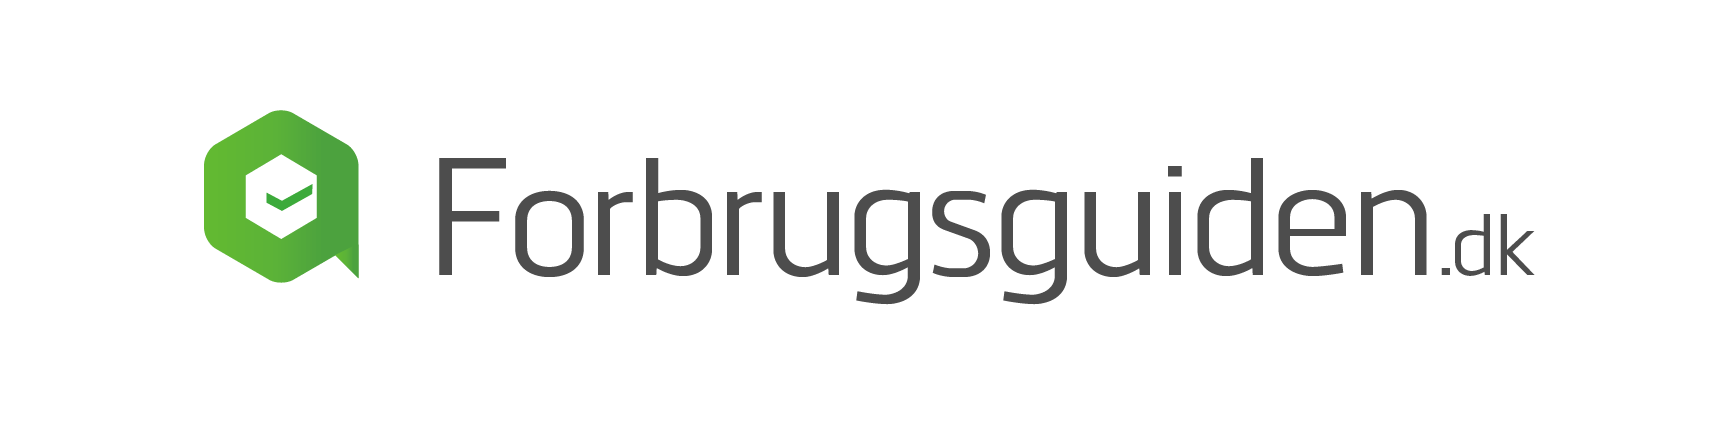 Forbrugsguiden-logo-04-01-1.png__PID:1fc6b7bf-9997-446e-9cab-0497622438e3